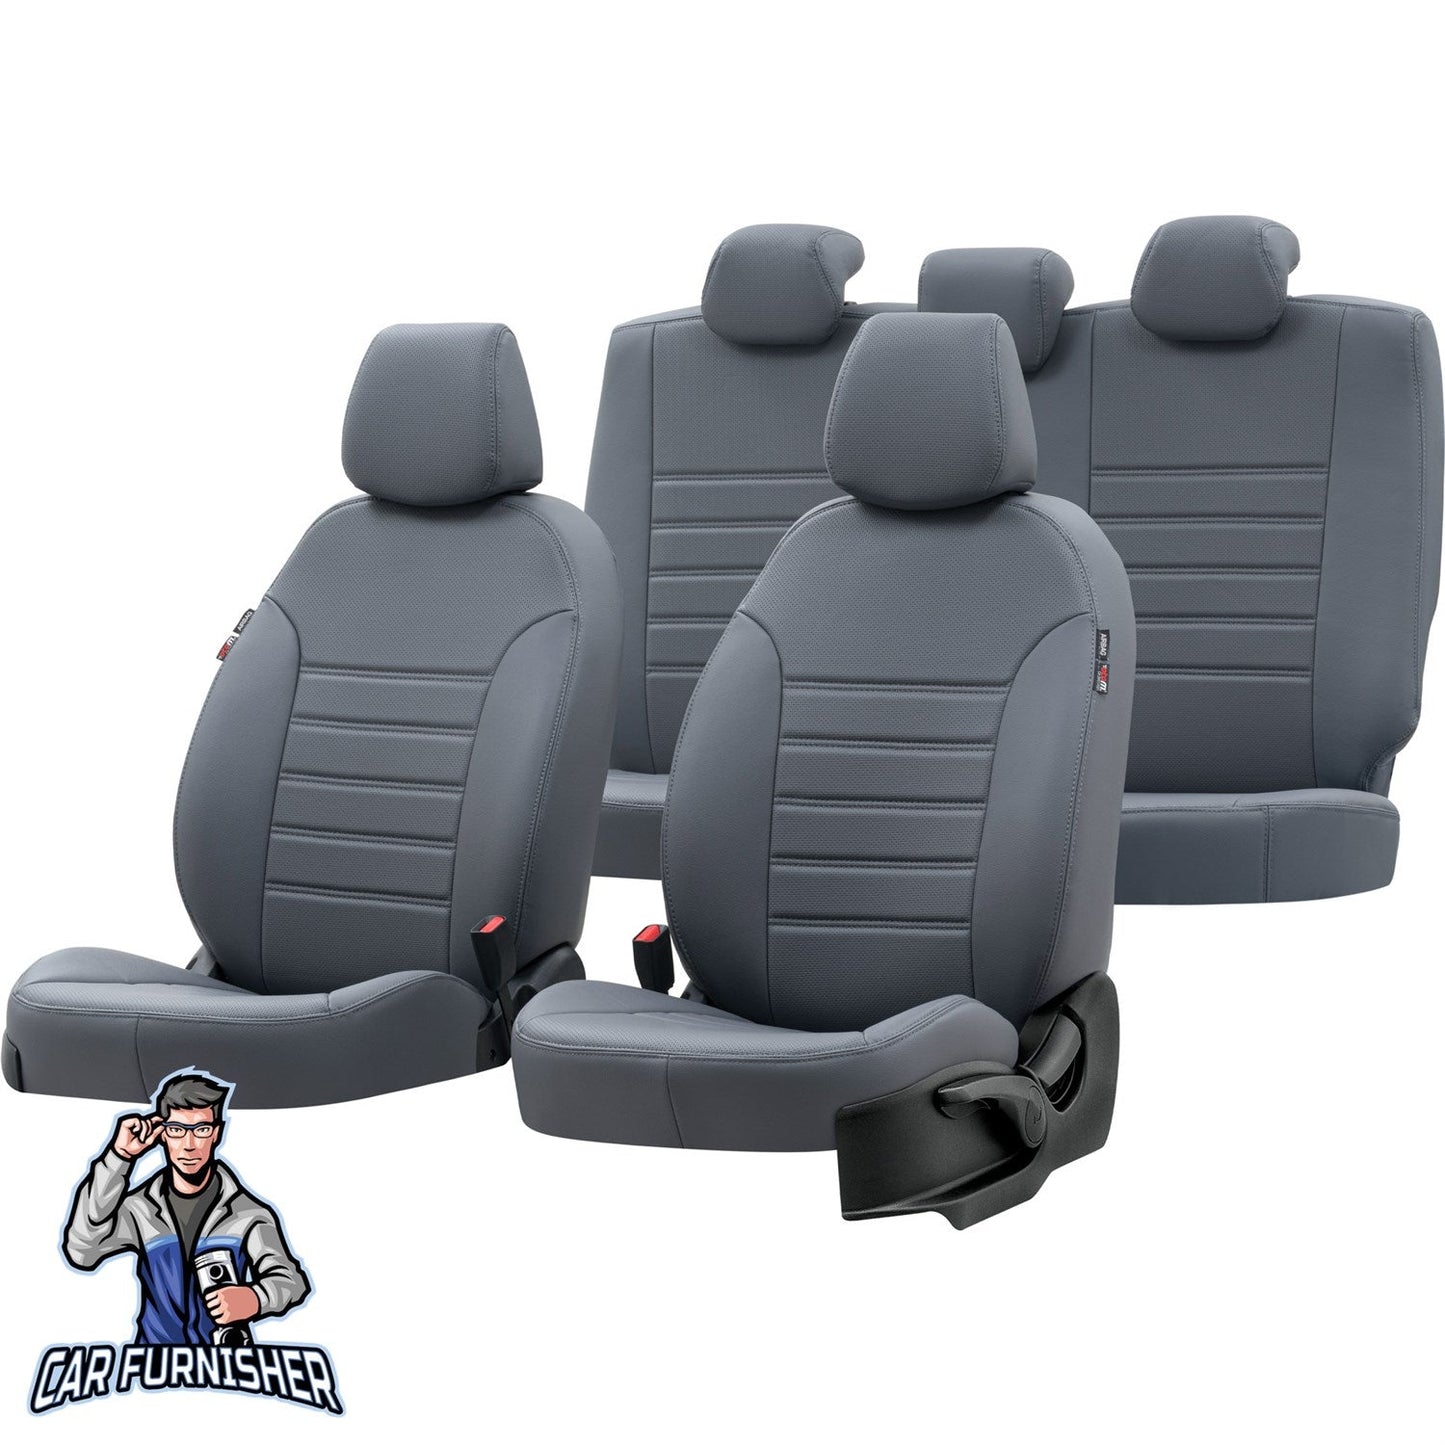 Volkswagen Golf Seat Cover New York Leather Design Smoked Leather